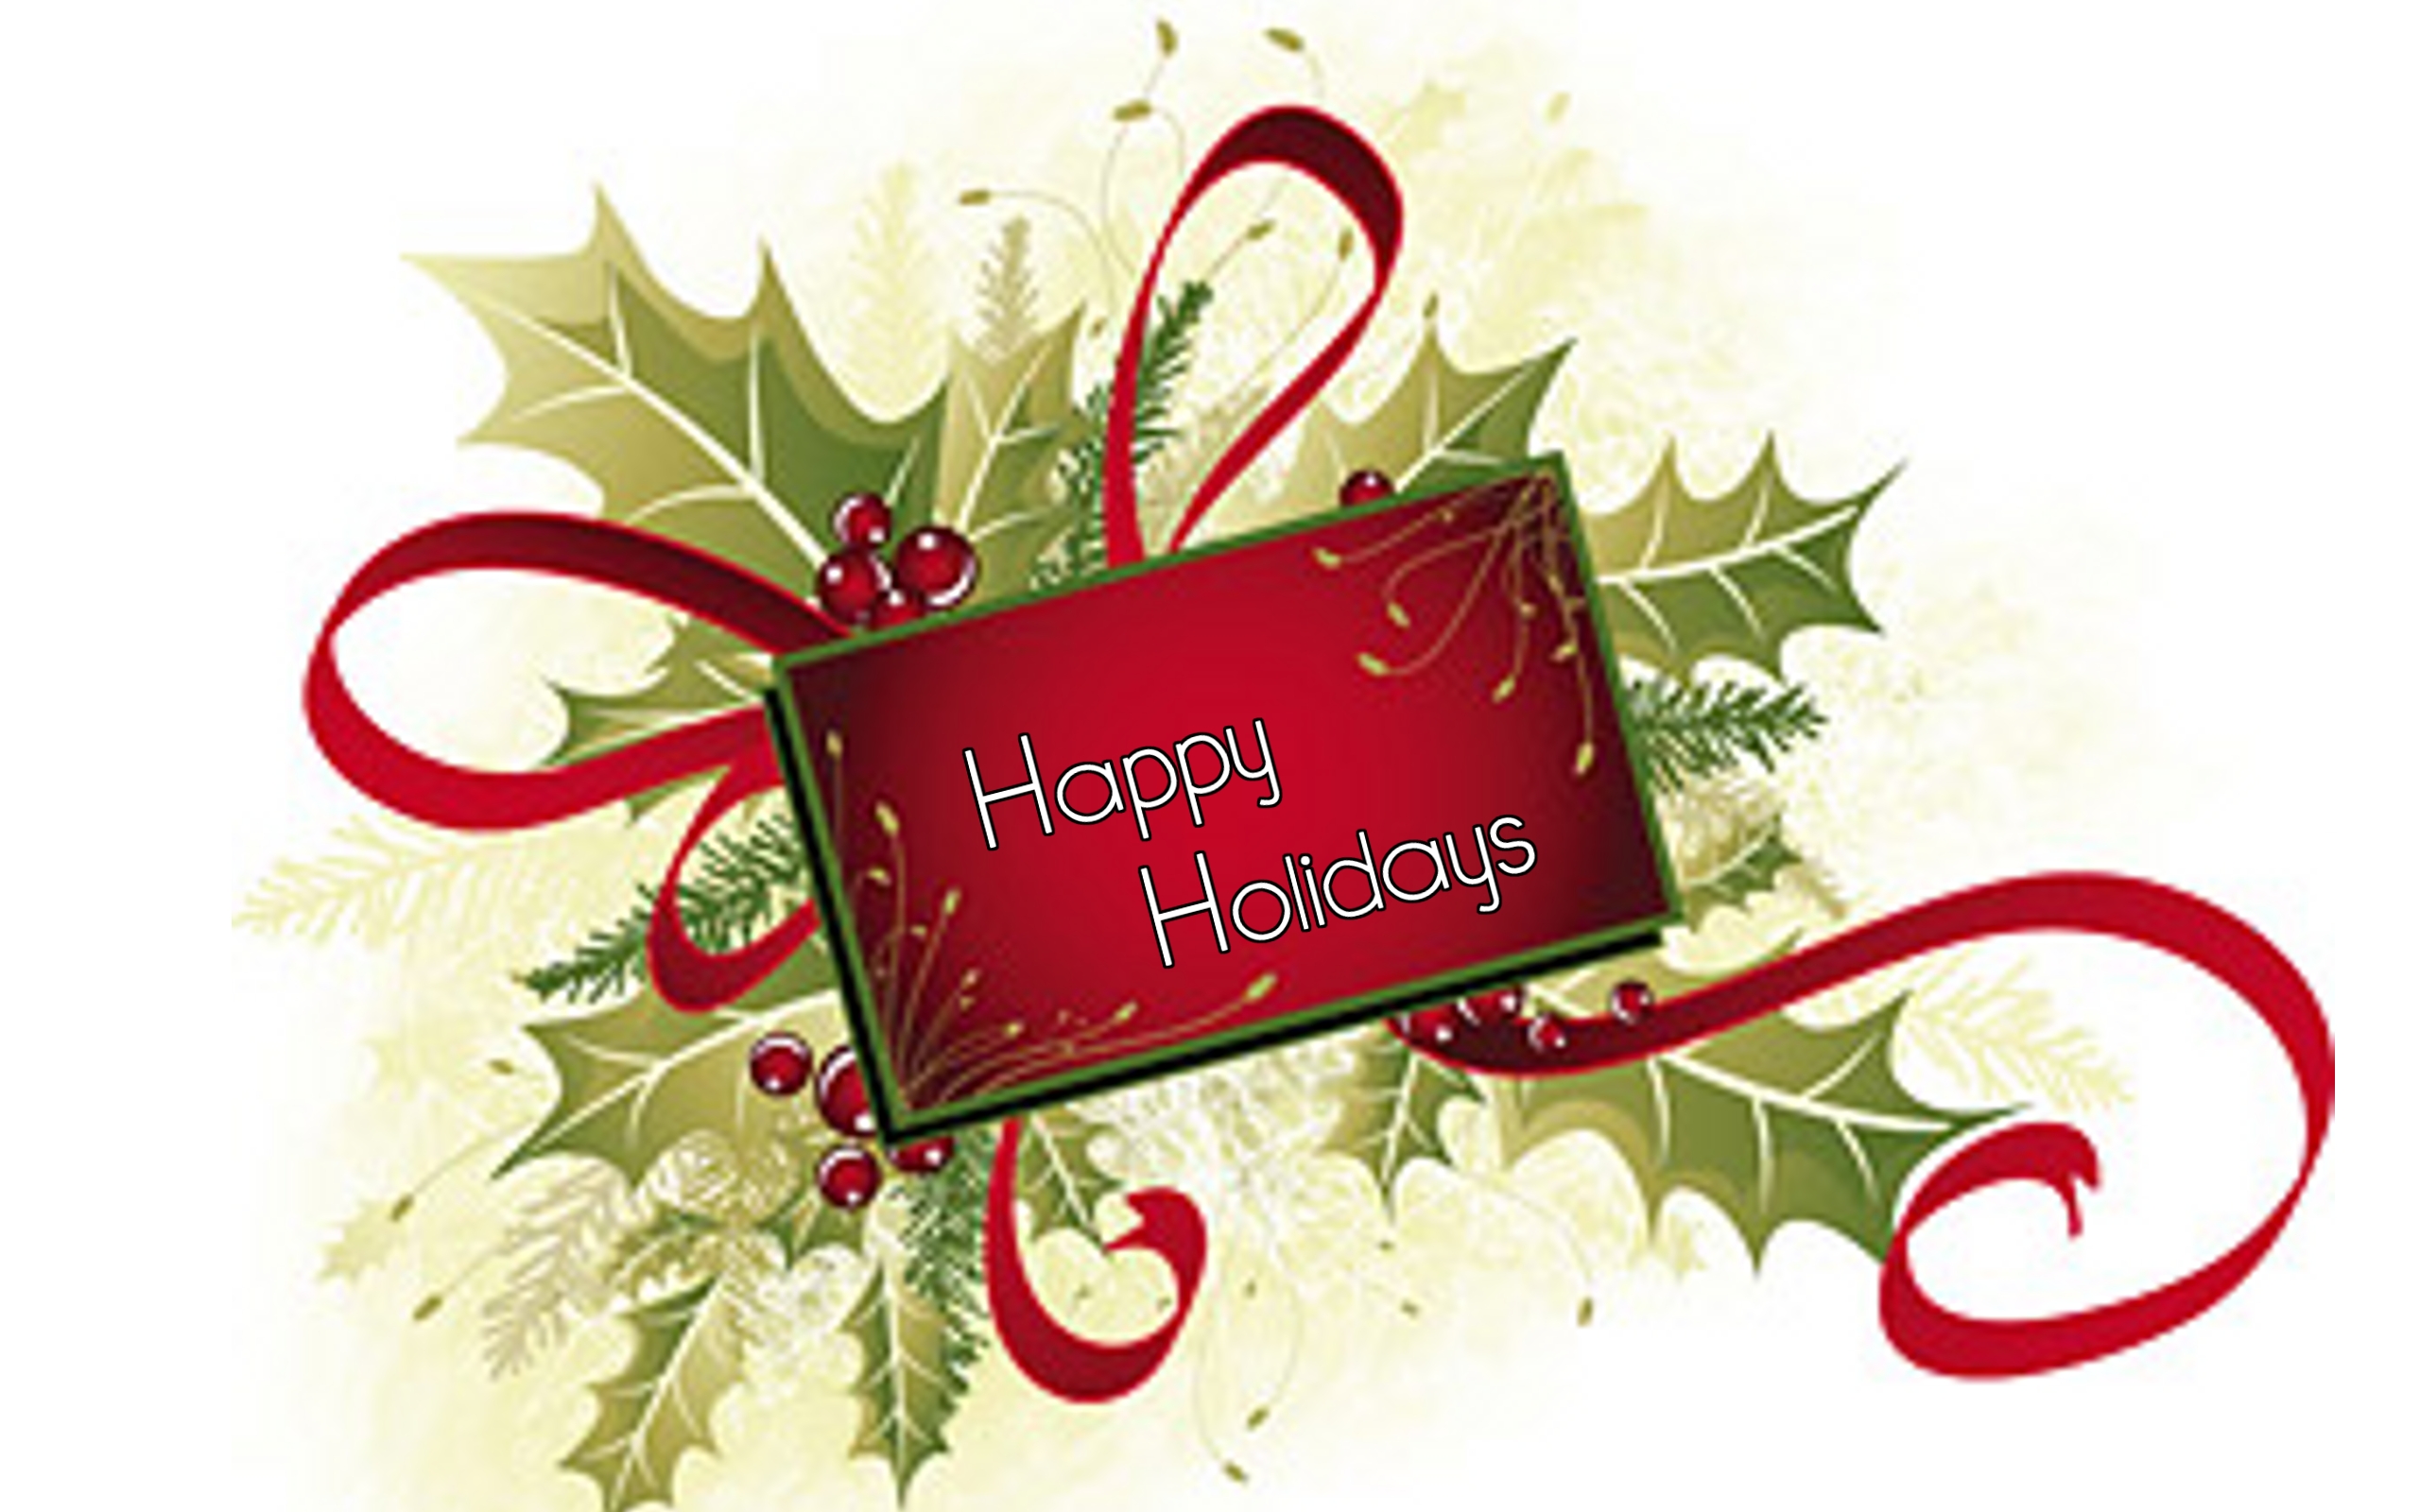 Happy holidays merry christmas and happy new year mybloggingdiary cliparts